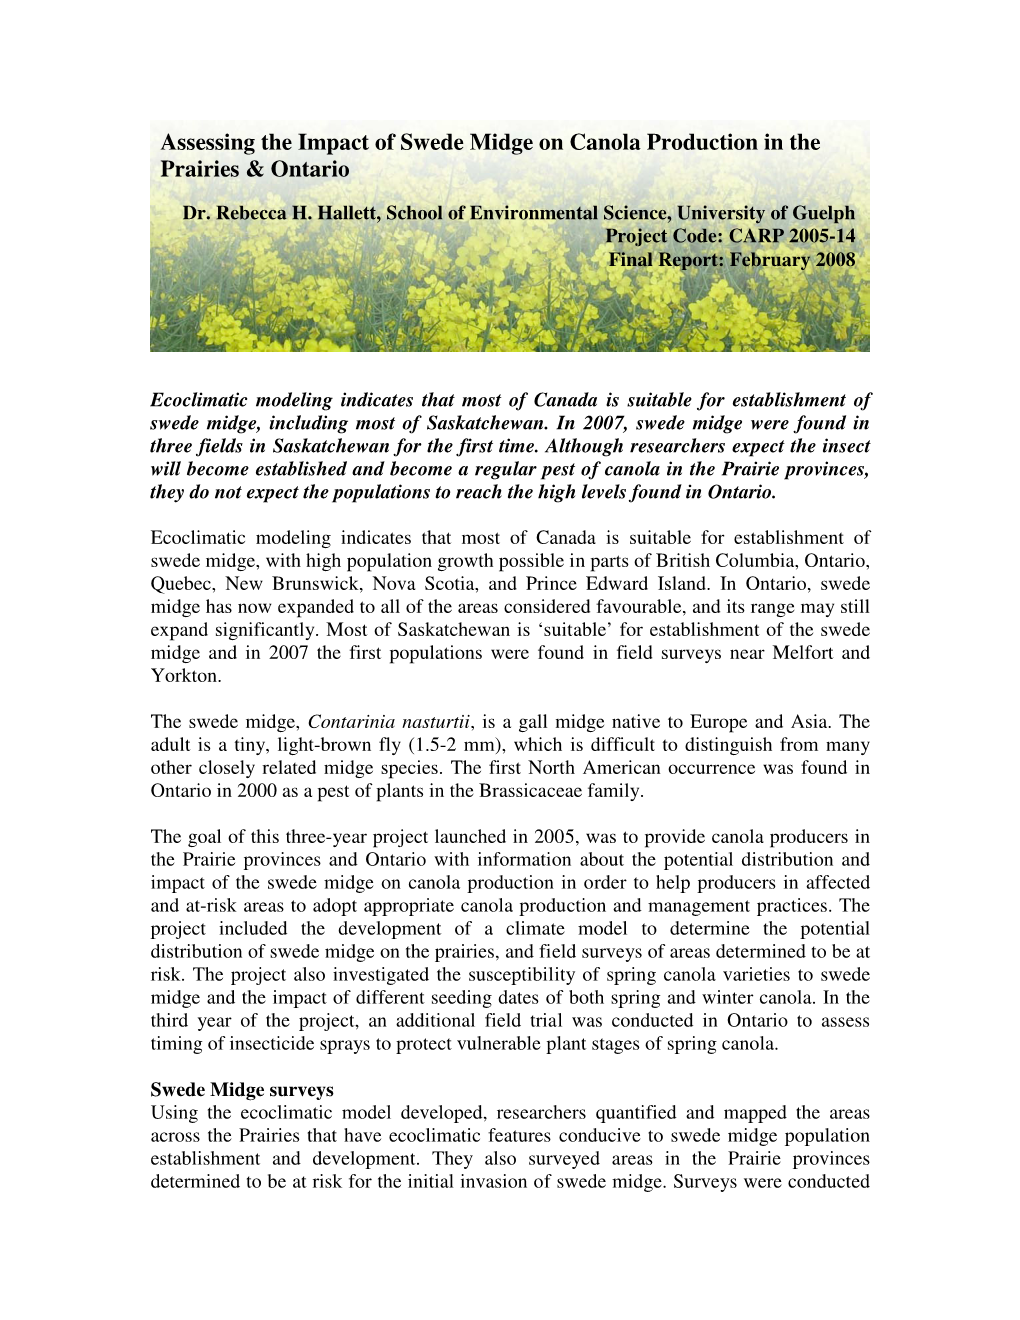 Assessing the Impact of Swede Midge on Canola Production in The